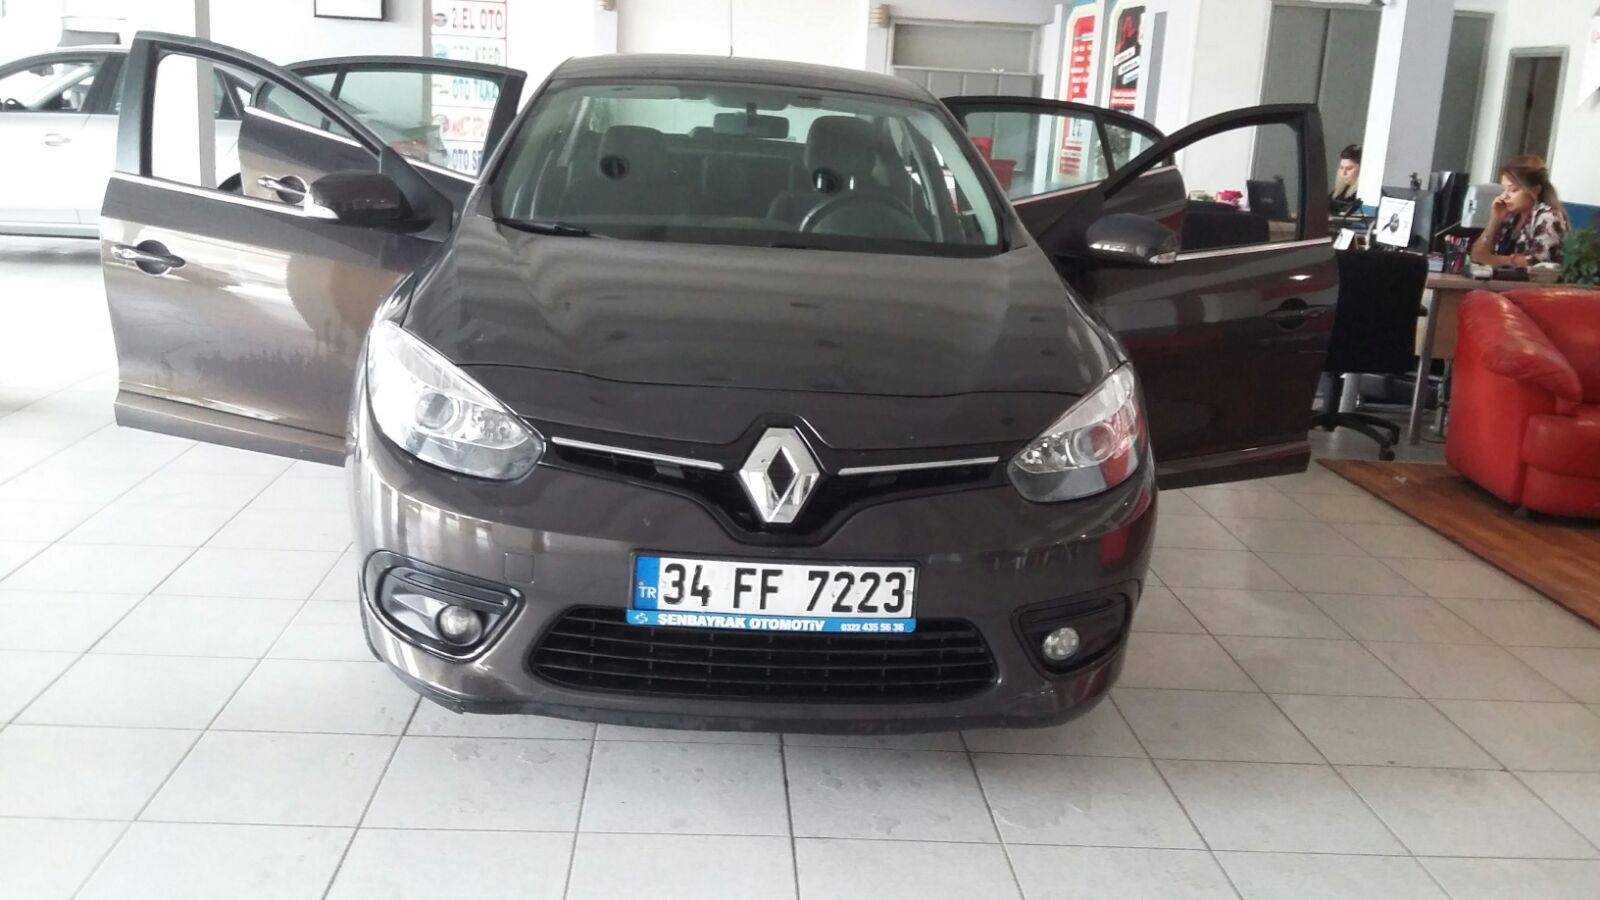 34 FF 7223 - 625.000 TL - 2016 Renault Fluence 1.5 dCi Touch 